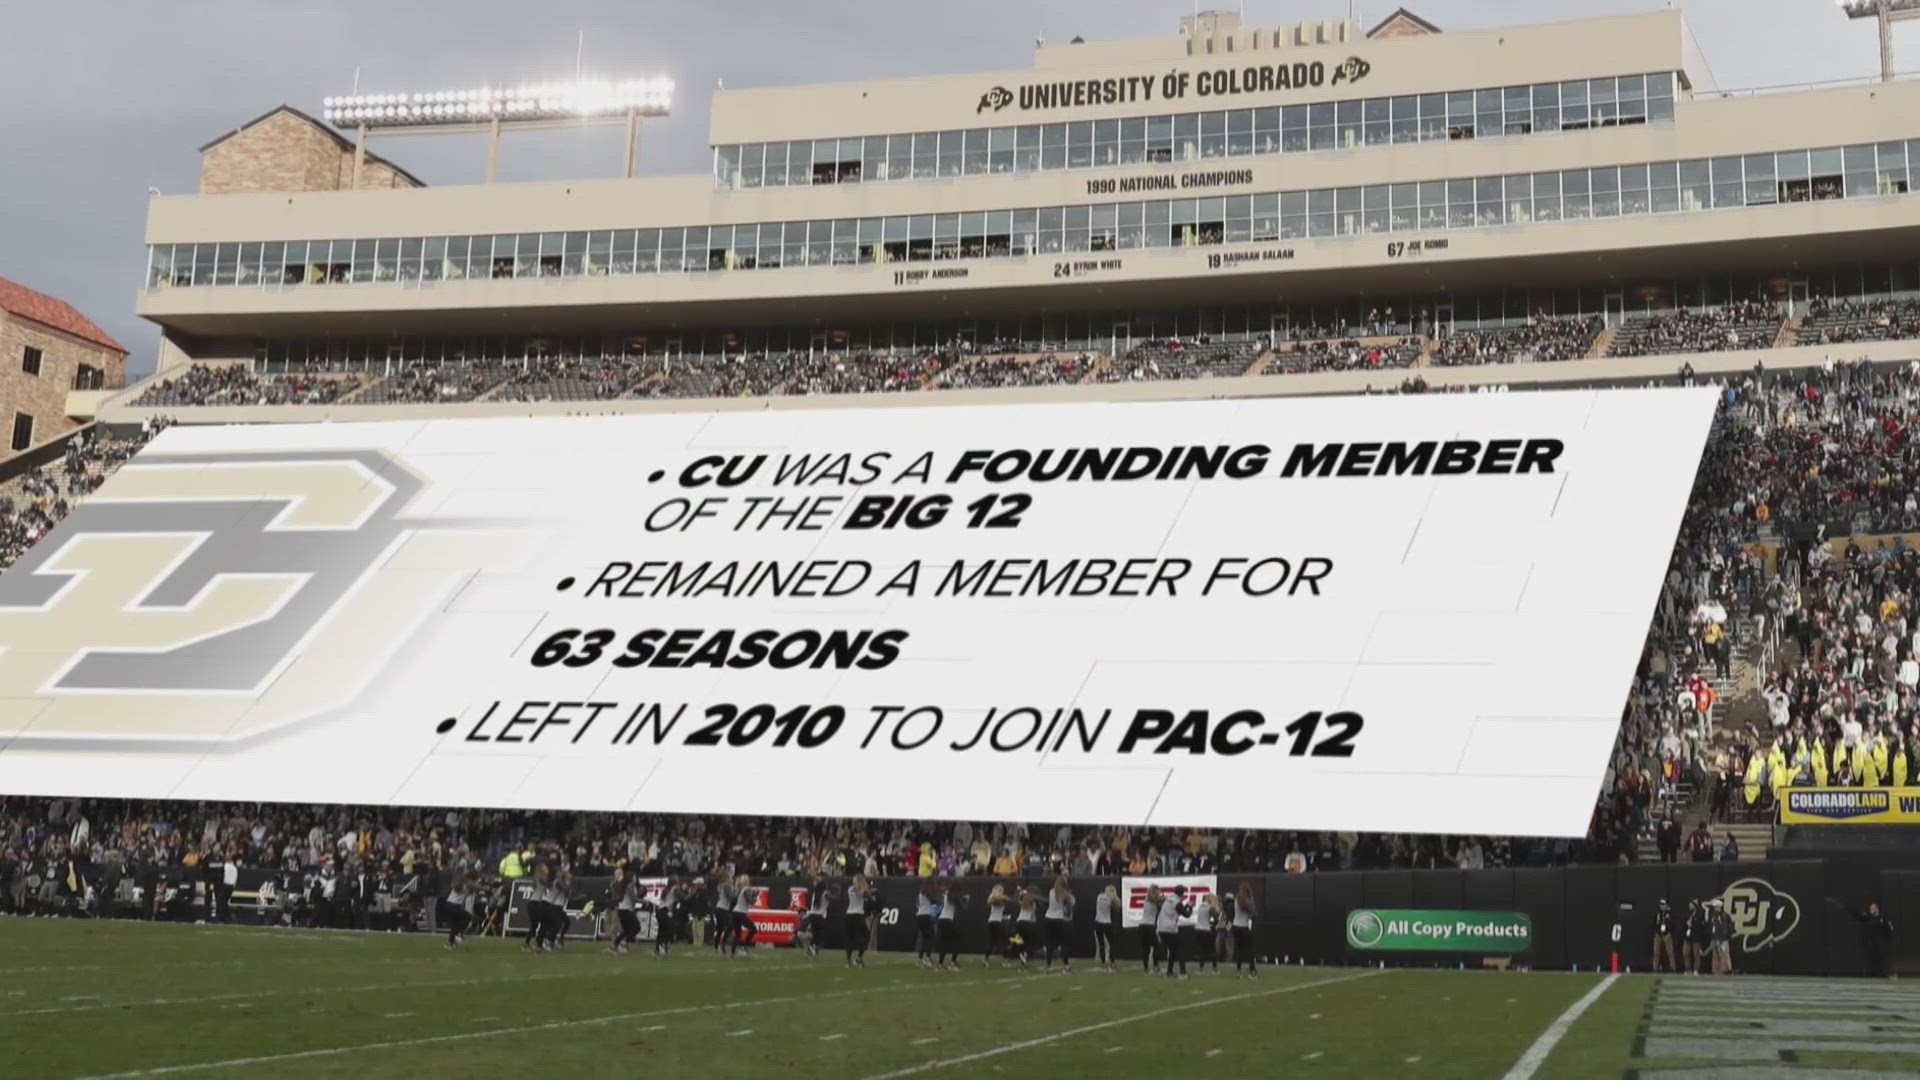 Speculation that CU is considering a return to the Big 12 from the Pac-12 is ramping up.